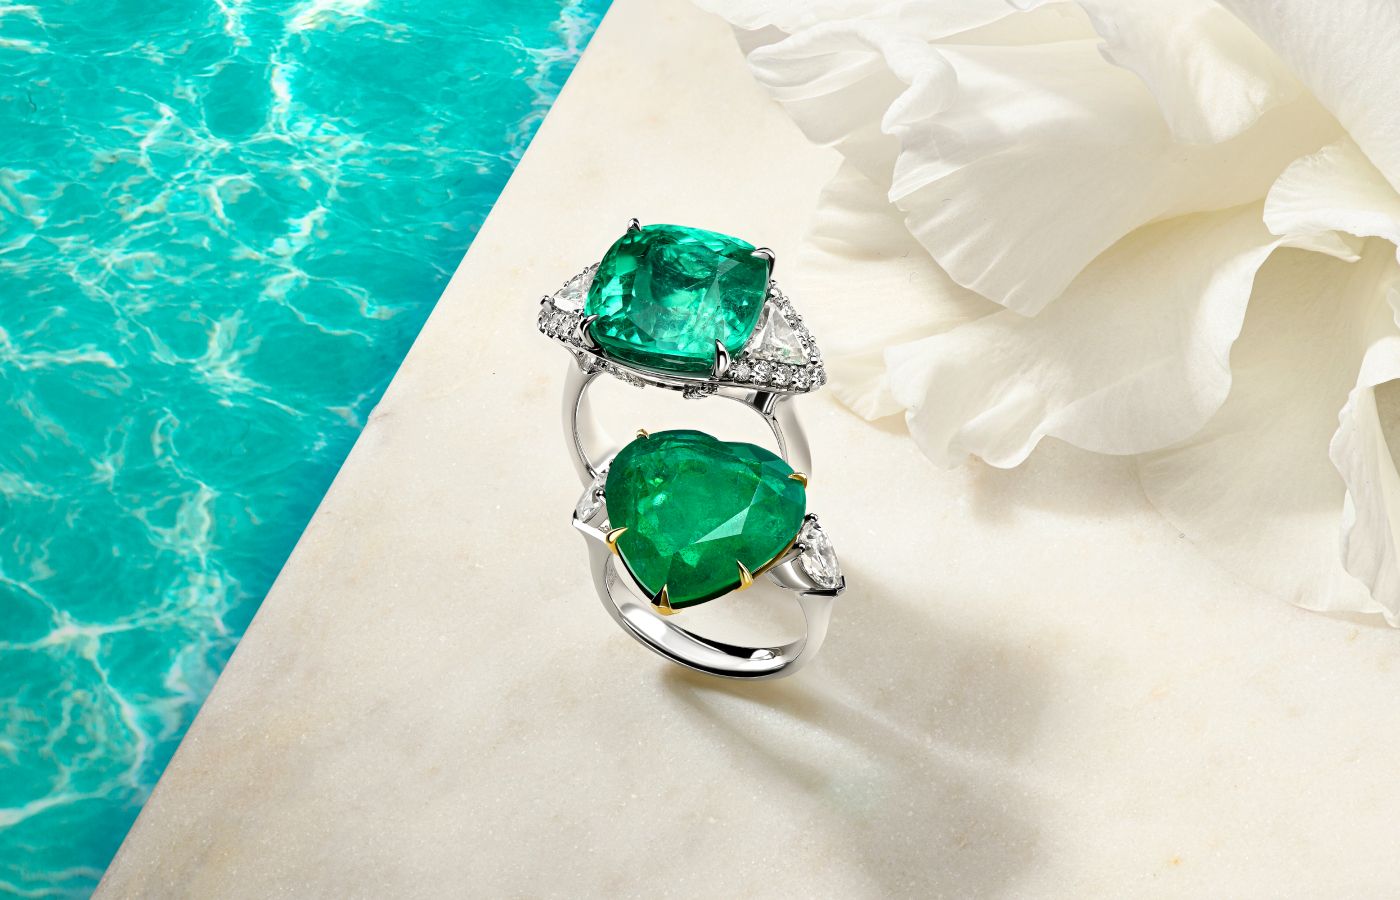 Parure Atelier High Jewellery rings featuring an 11.50-ct Colombian emerald and a 10.71-ct Zambian emerald 